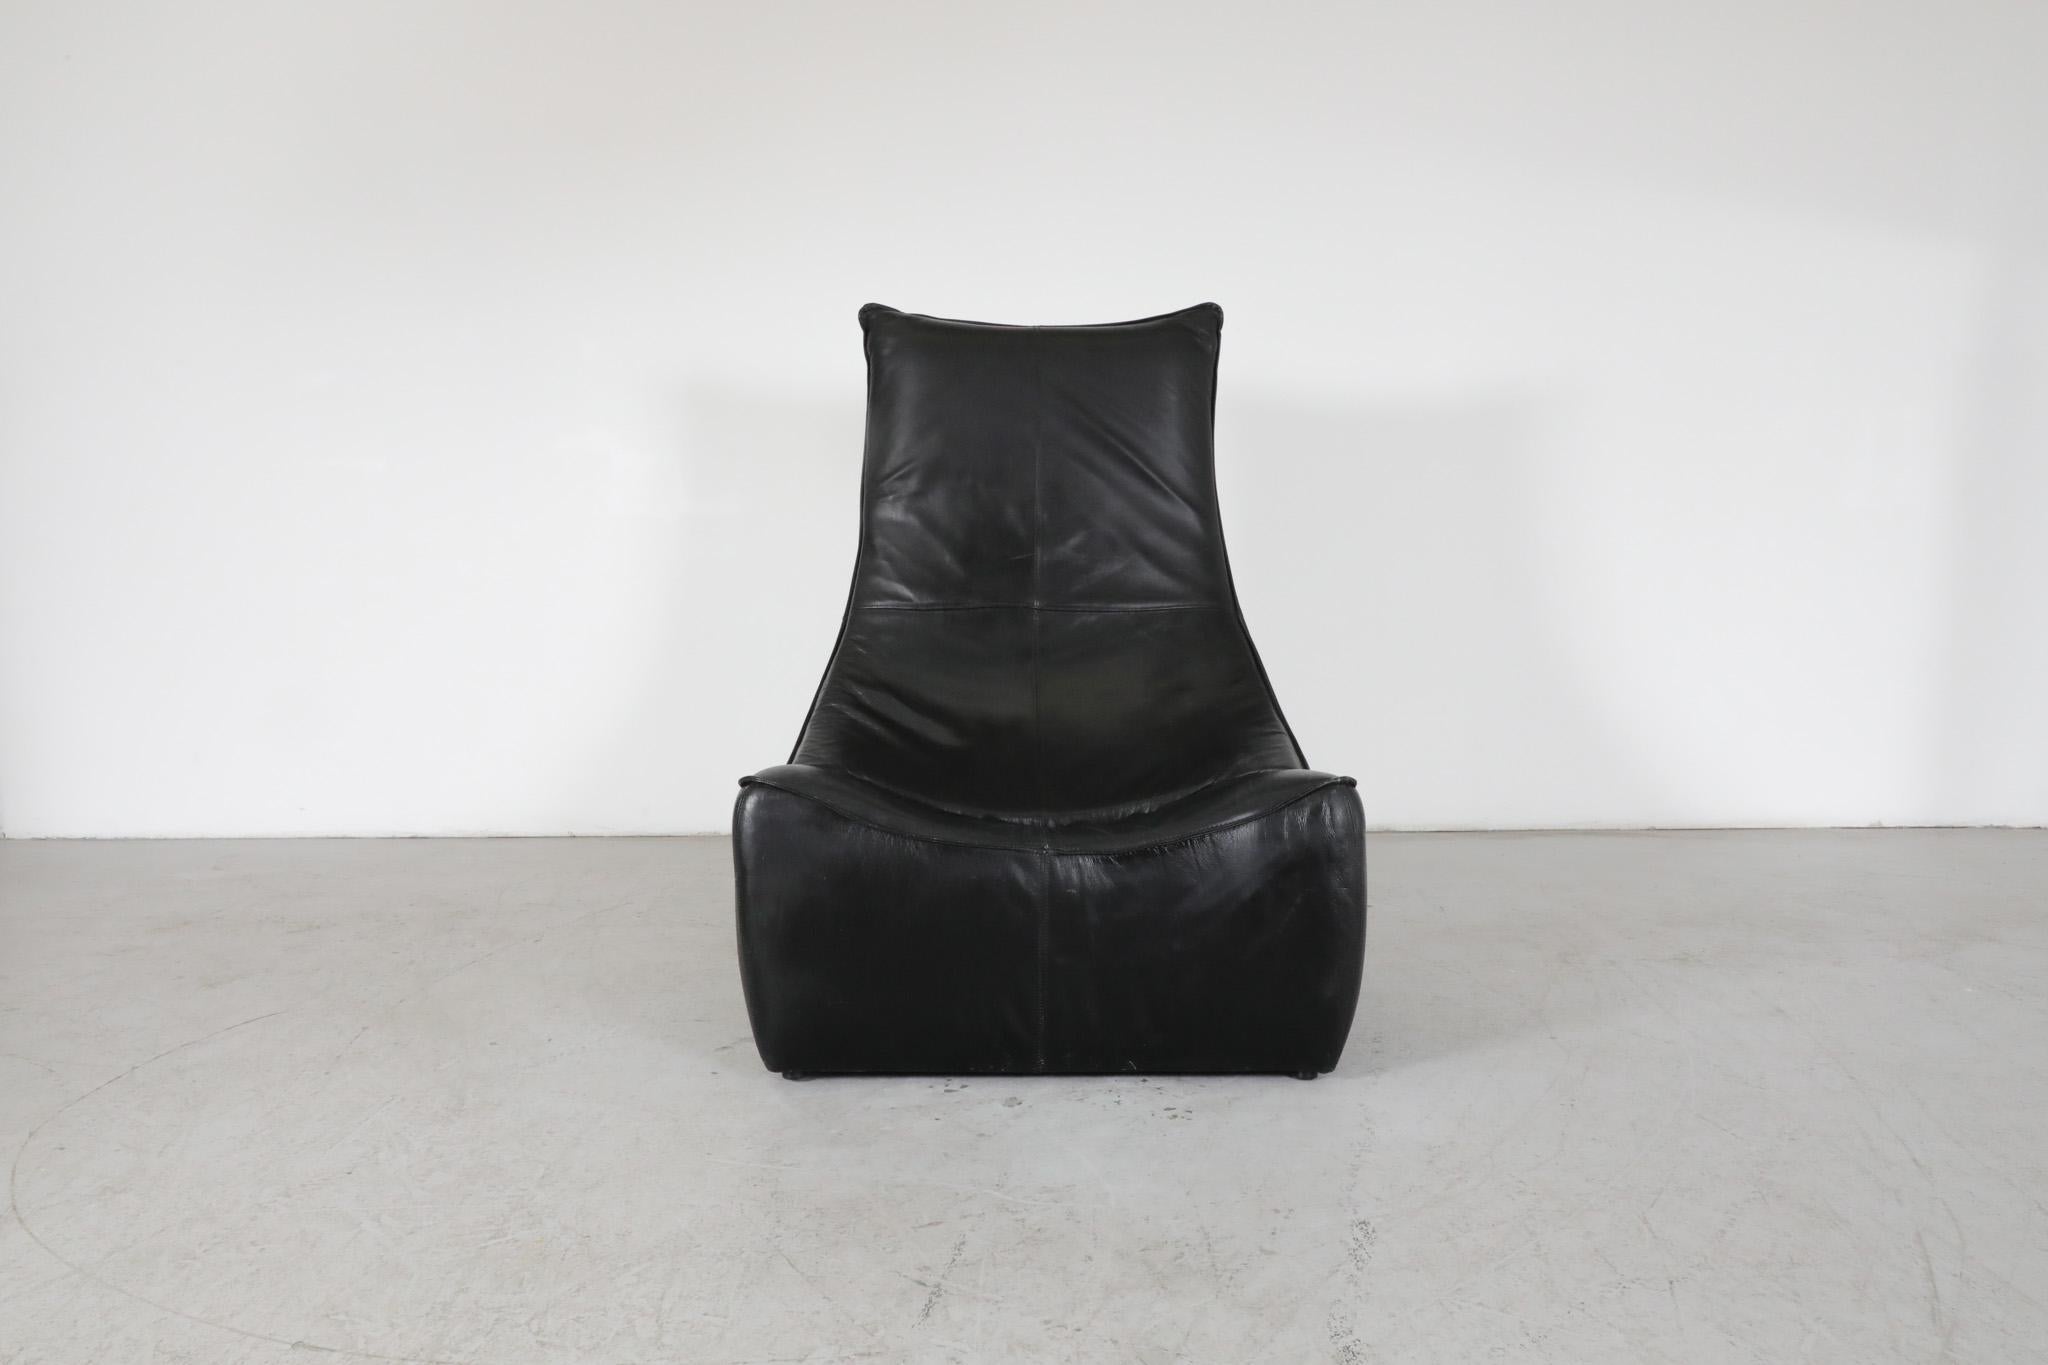 Mid-Century 'Rock' lounge chair in black leather designed by Gerard van den Berg for Montis. Iconic frameless design with soft curves and high back. Sleek single lounge chair version of 'The Rock' loveseat. In original condition with some light wear